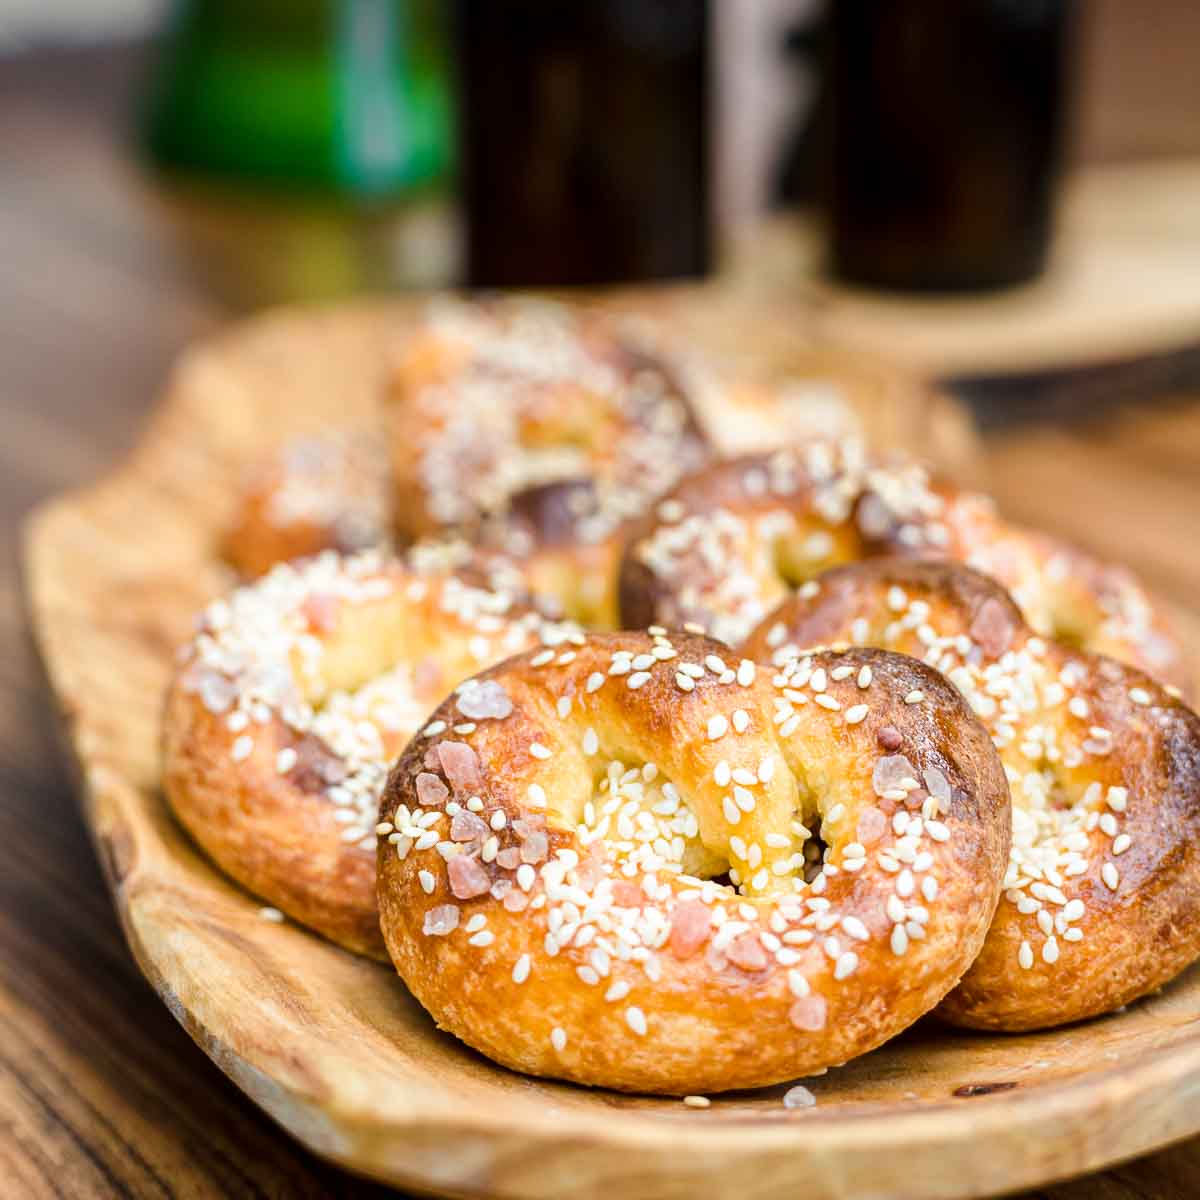 Pretzels with sesame seeds on a wooden plate.